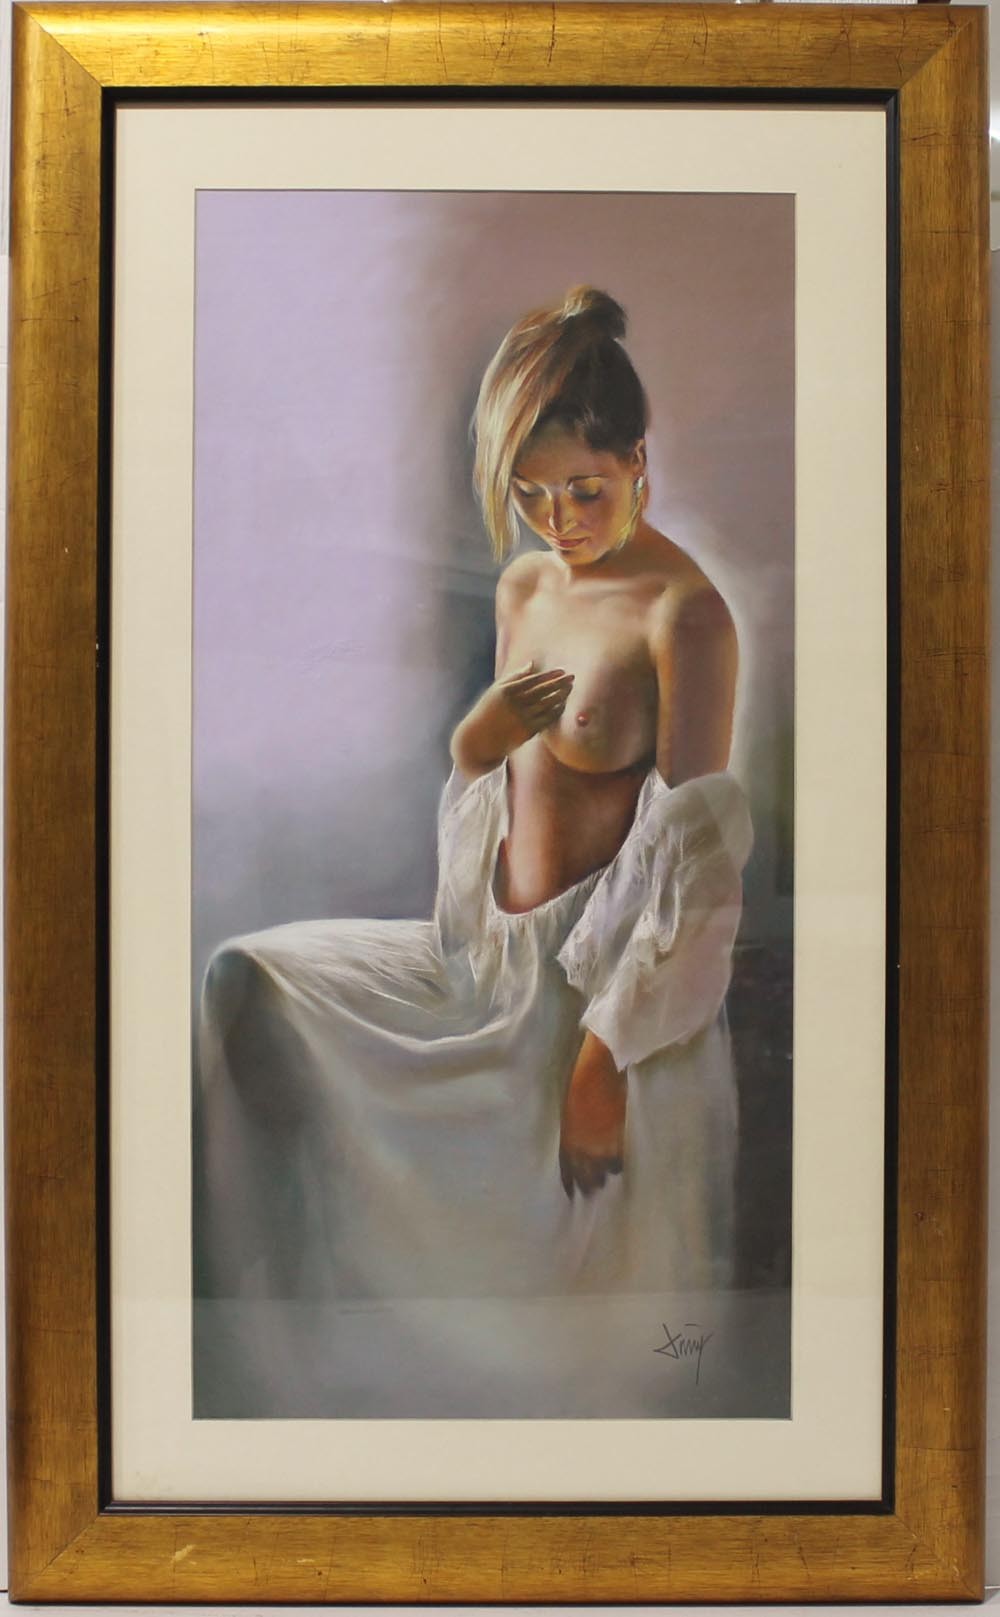 Naked woman bowing For sale as Framed Prints, Photos, Wall Art and